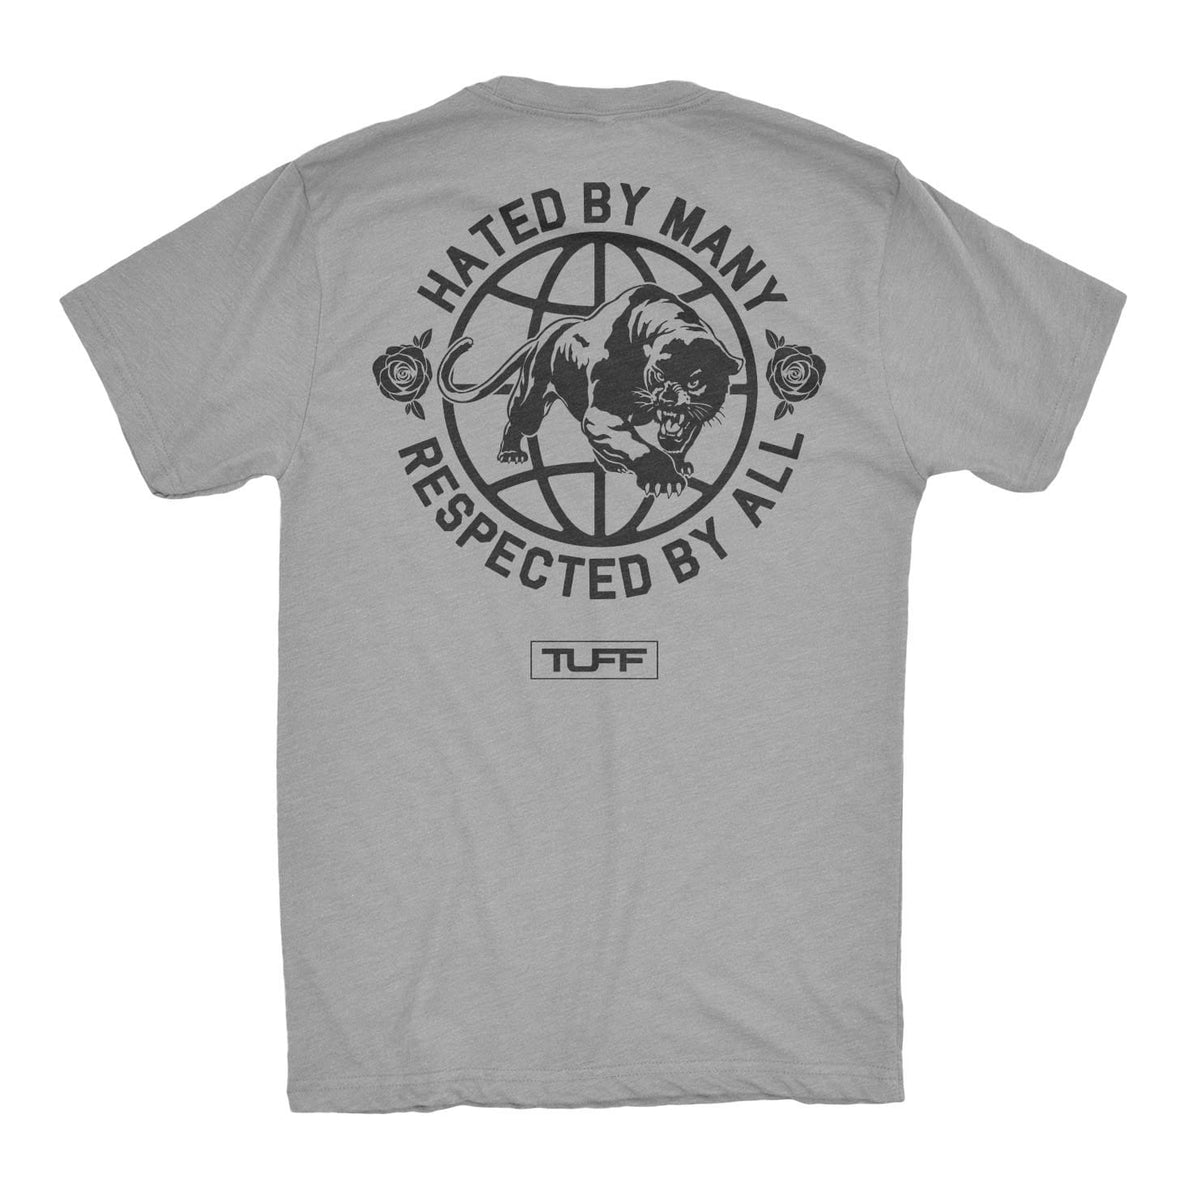 Hated By Many, Respected By All Tee S / Heather Gray TuffWraps.com